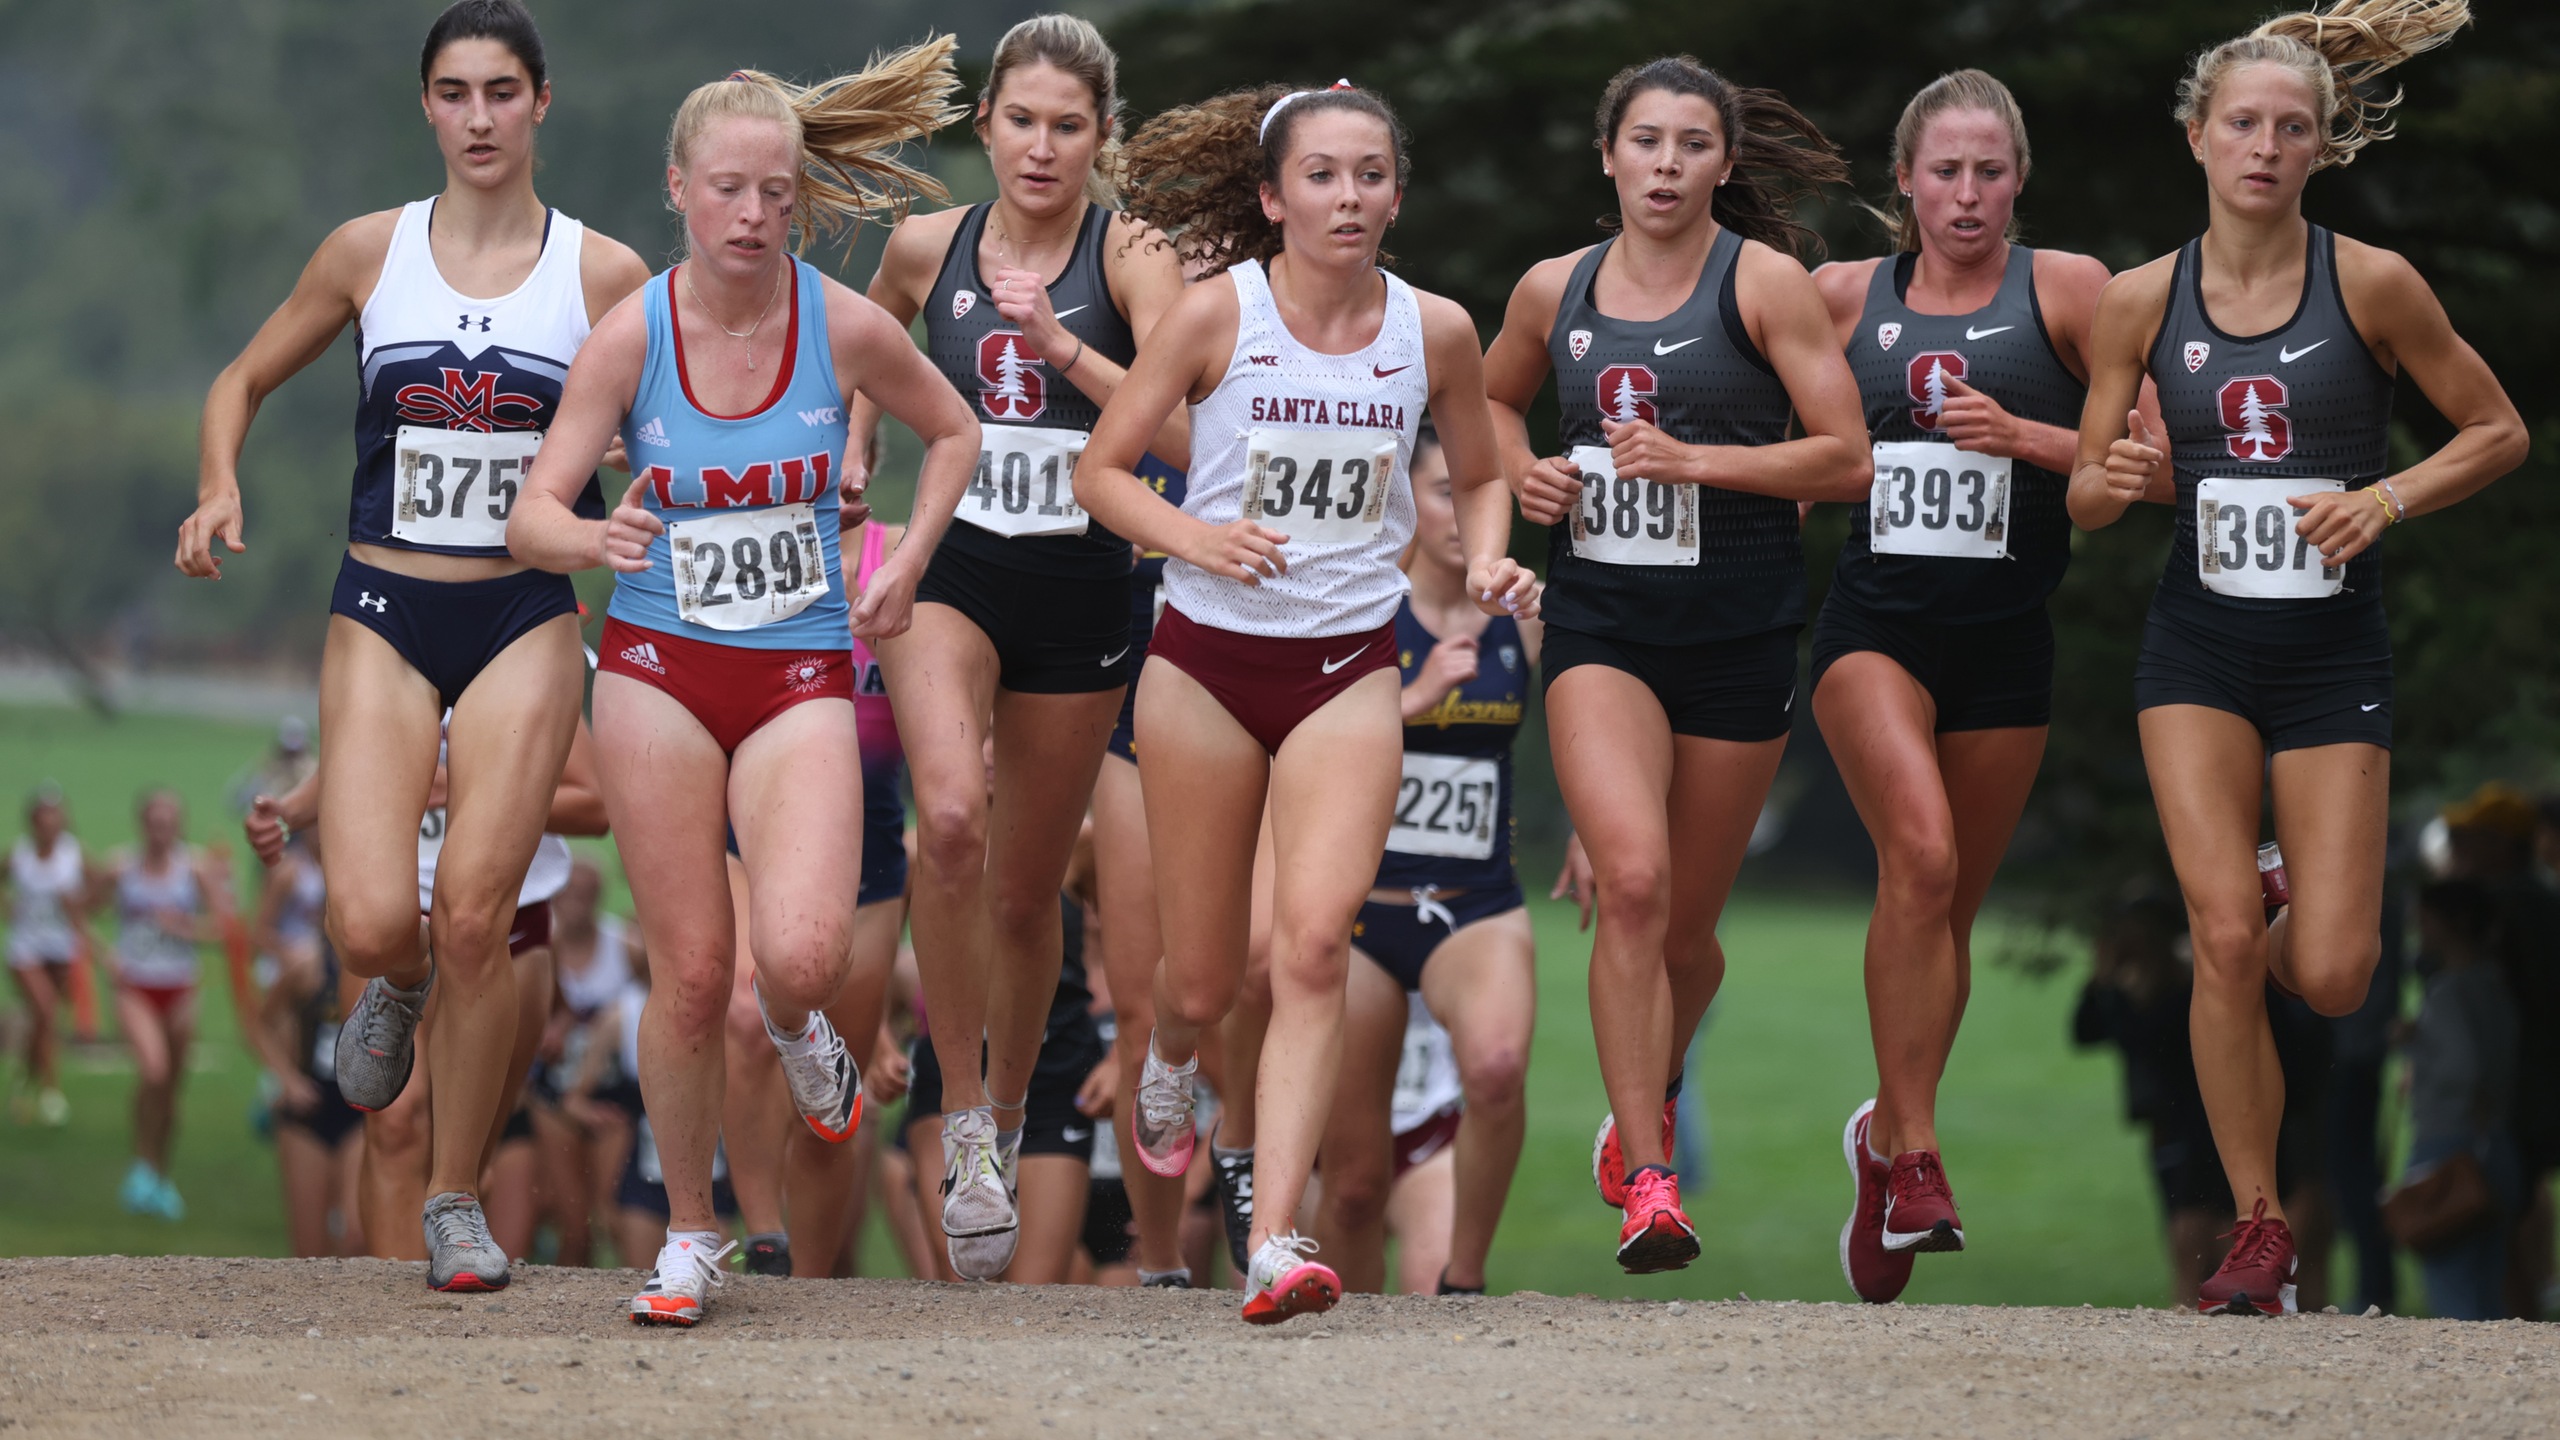 Season Begins for Women's Cross Country at USF Invitational